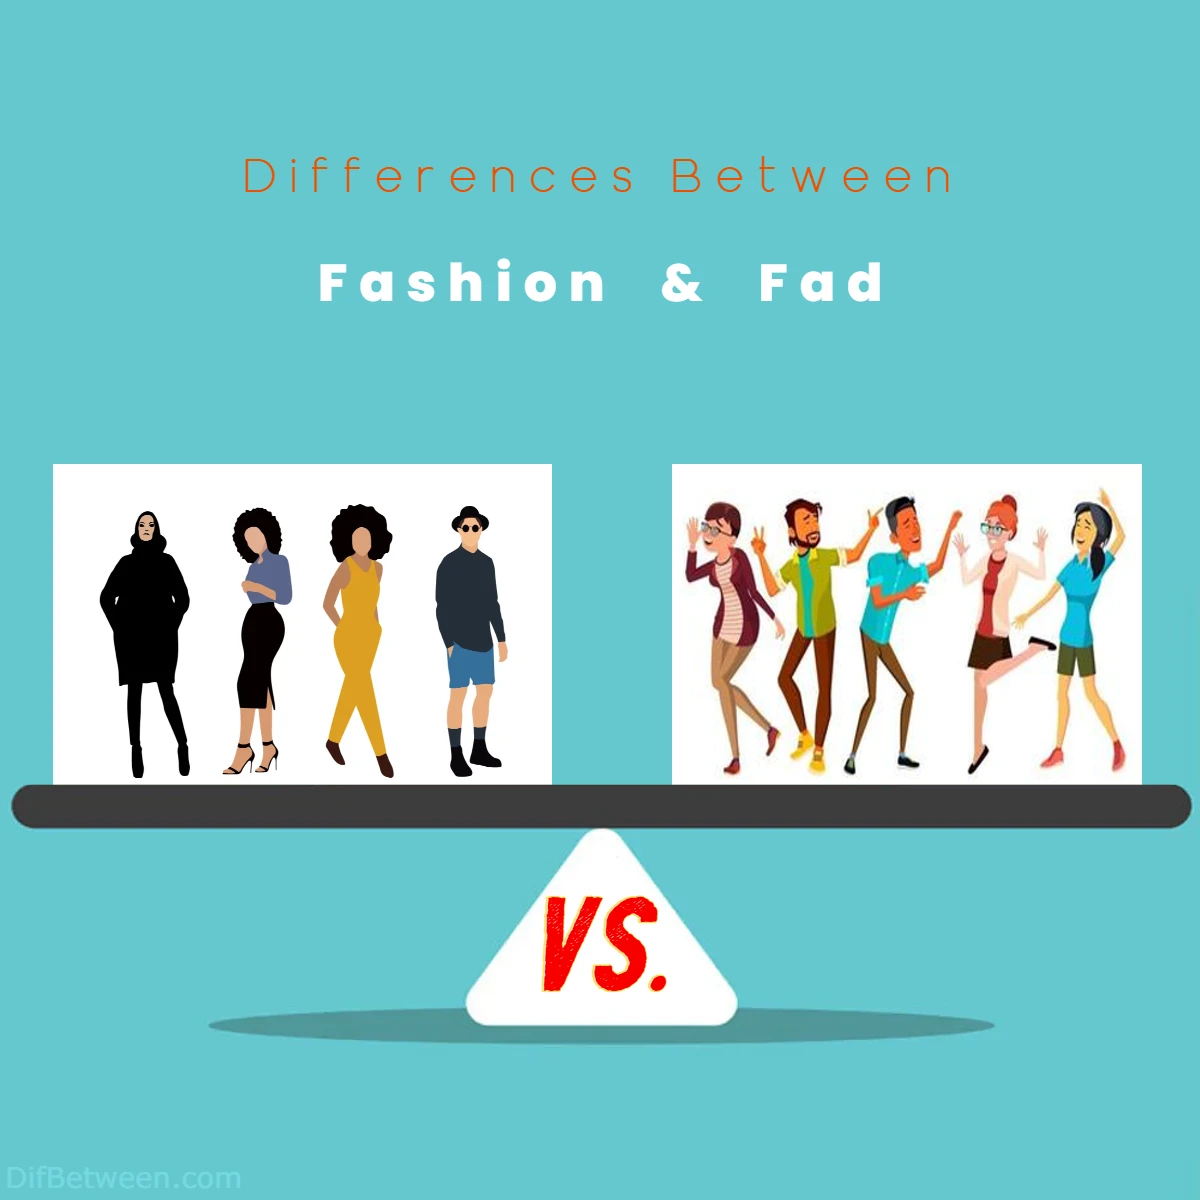 Differences Between Fashion vs Fad